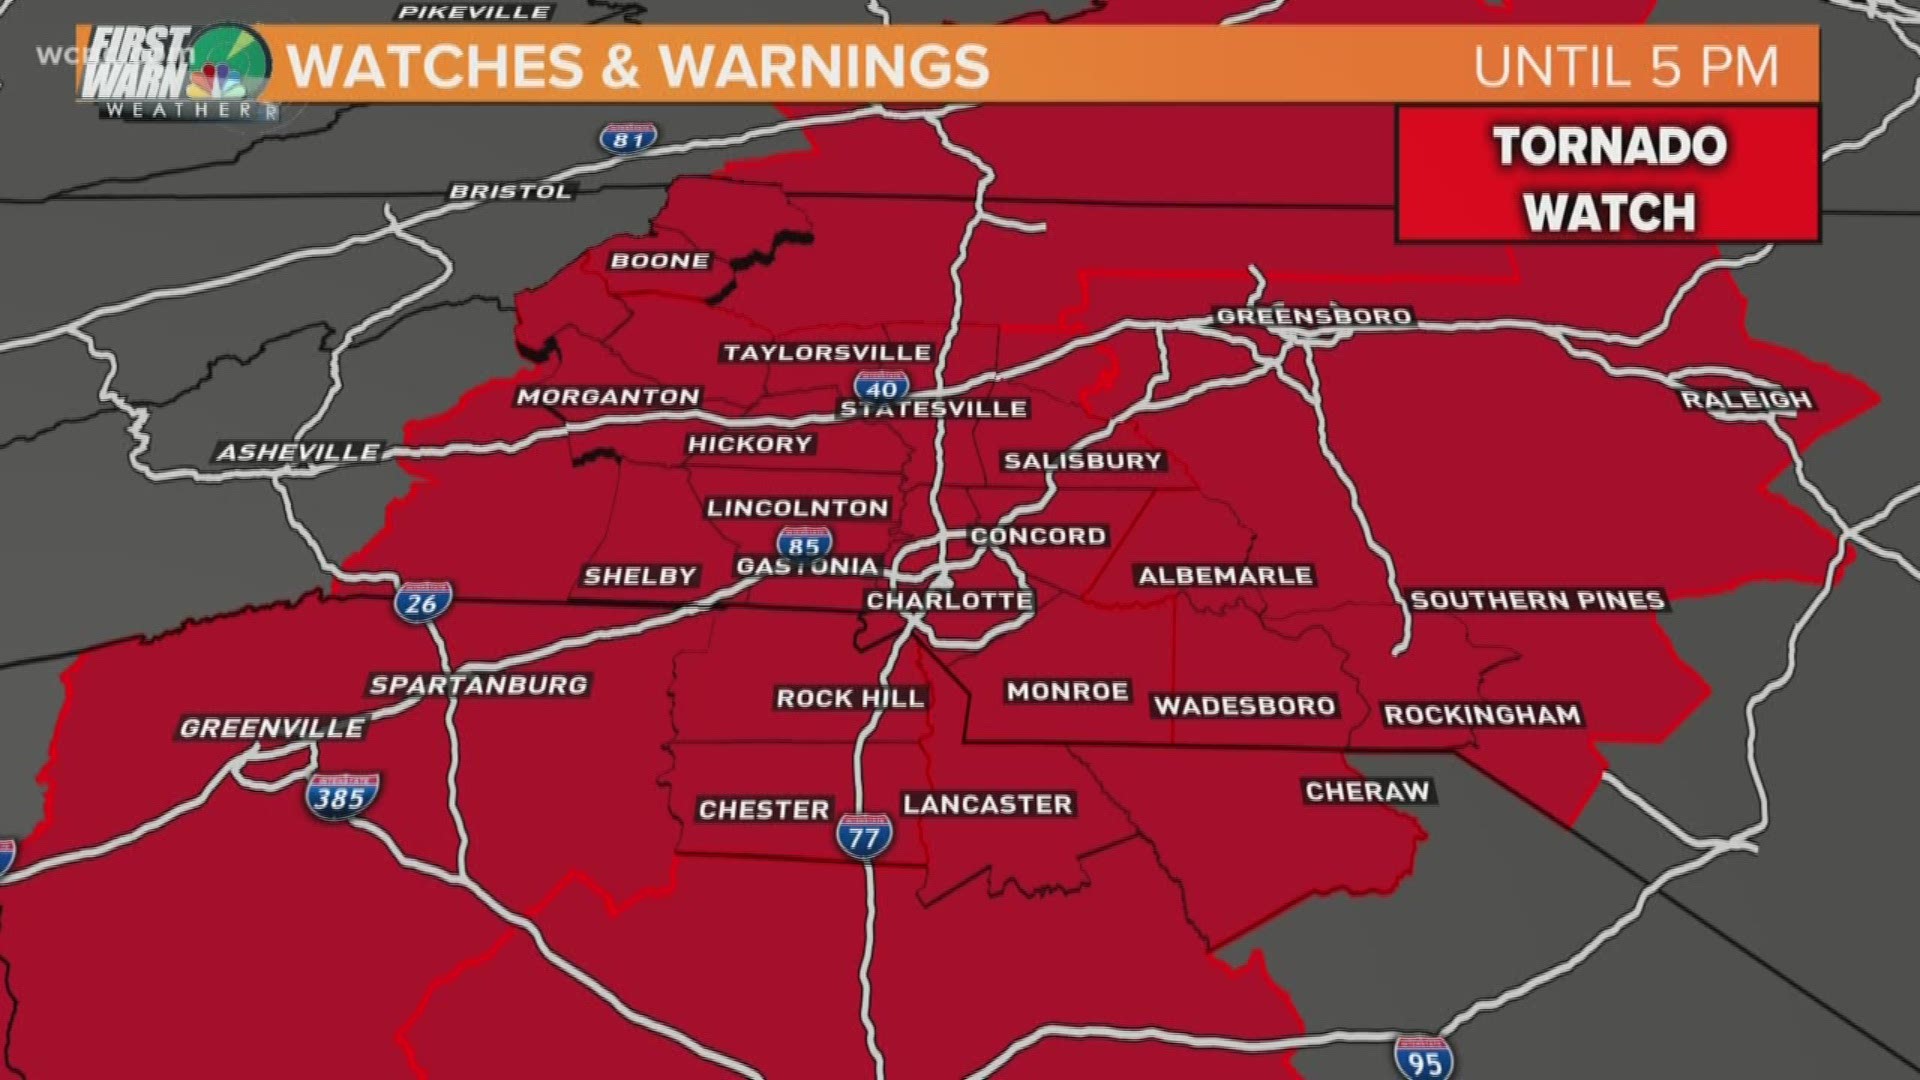 A Tornado Watch is in effect until 5 p.m. for the Charlotte area ahead of a line of thunderstorms that could bring severe weather Friday afternoon.